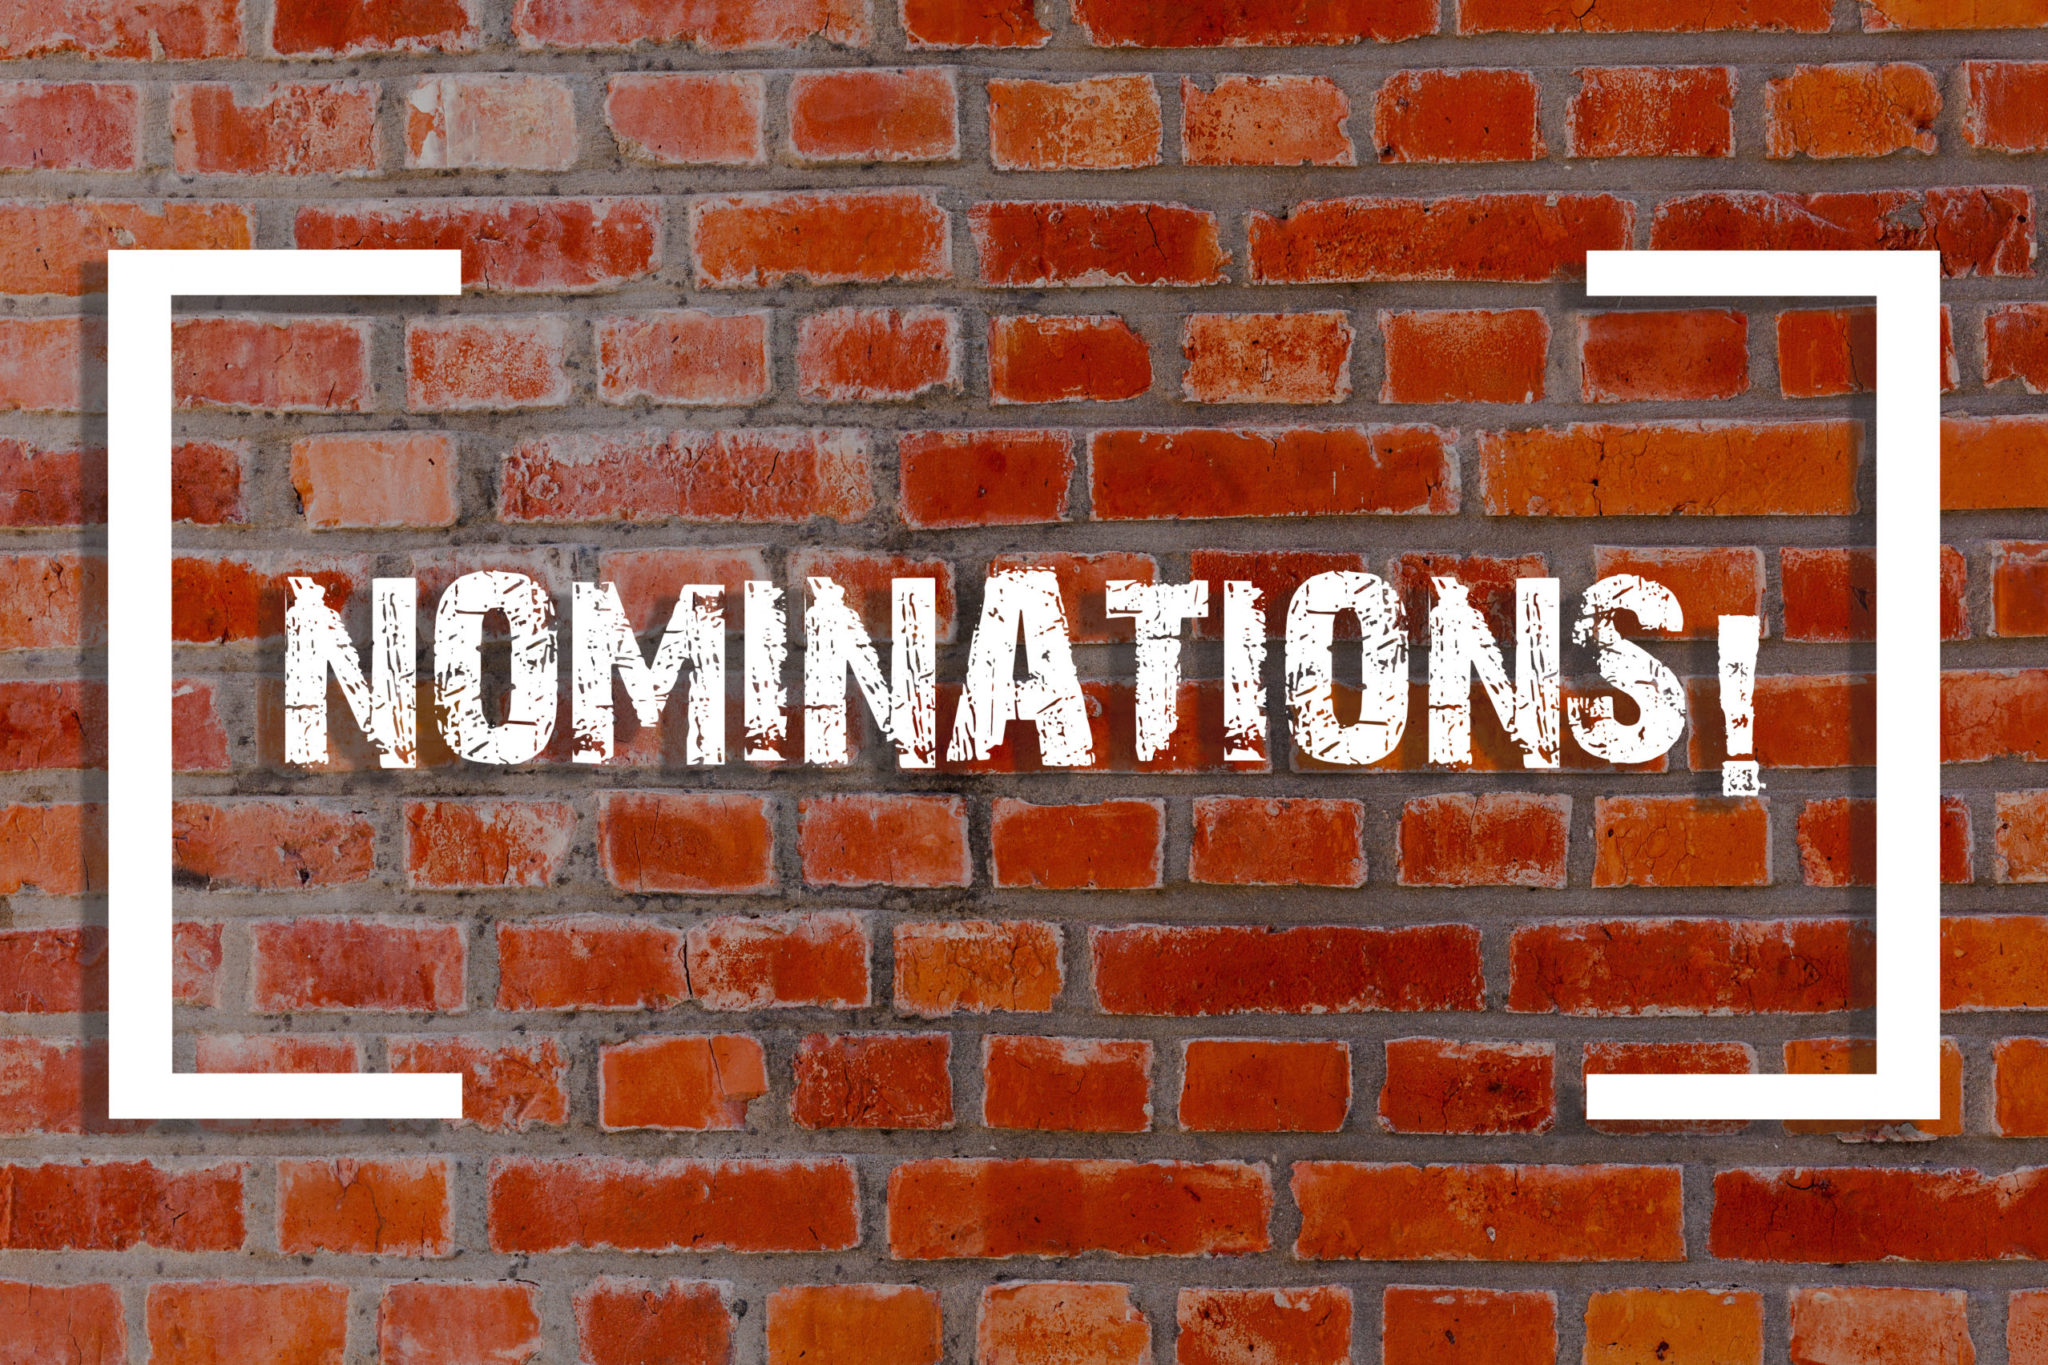 Seeking Nominations for the 2022 Outstanding Nonprofit Lawyer Awards